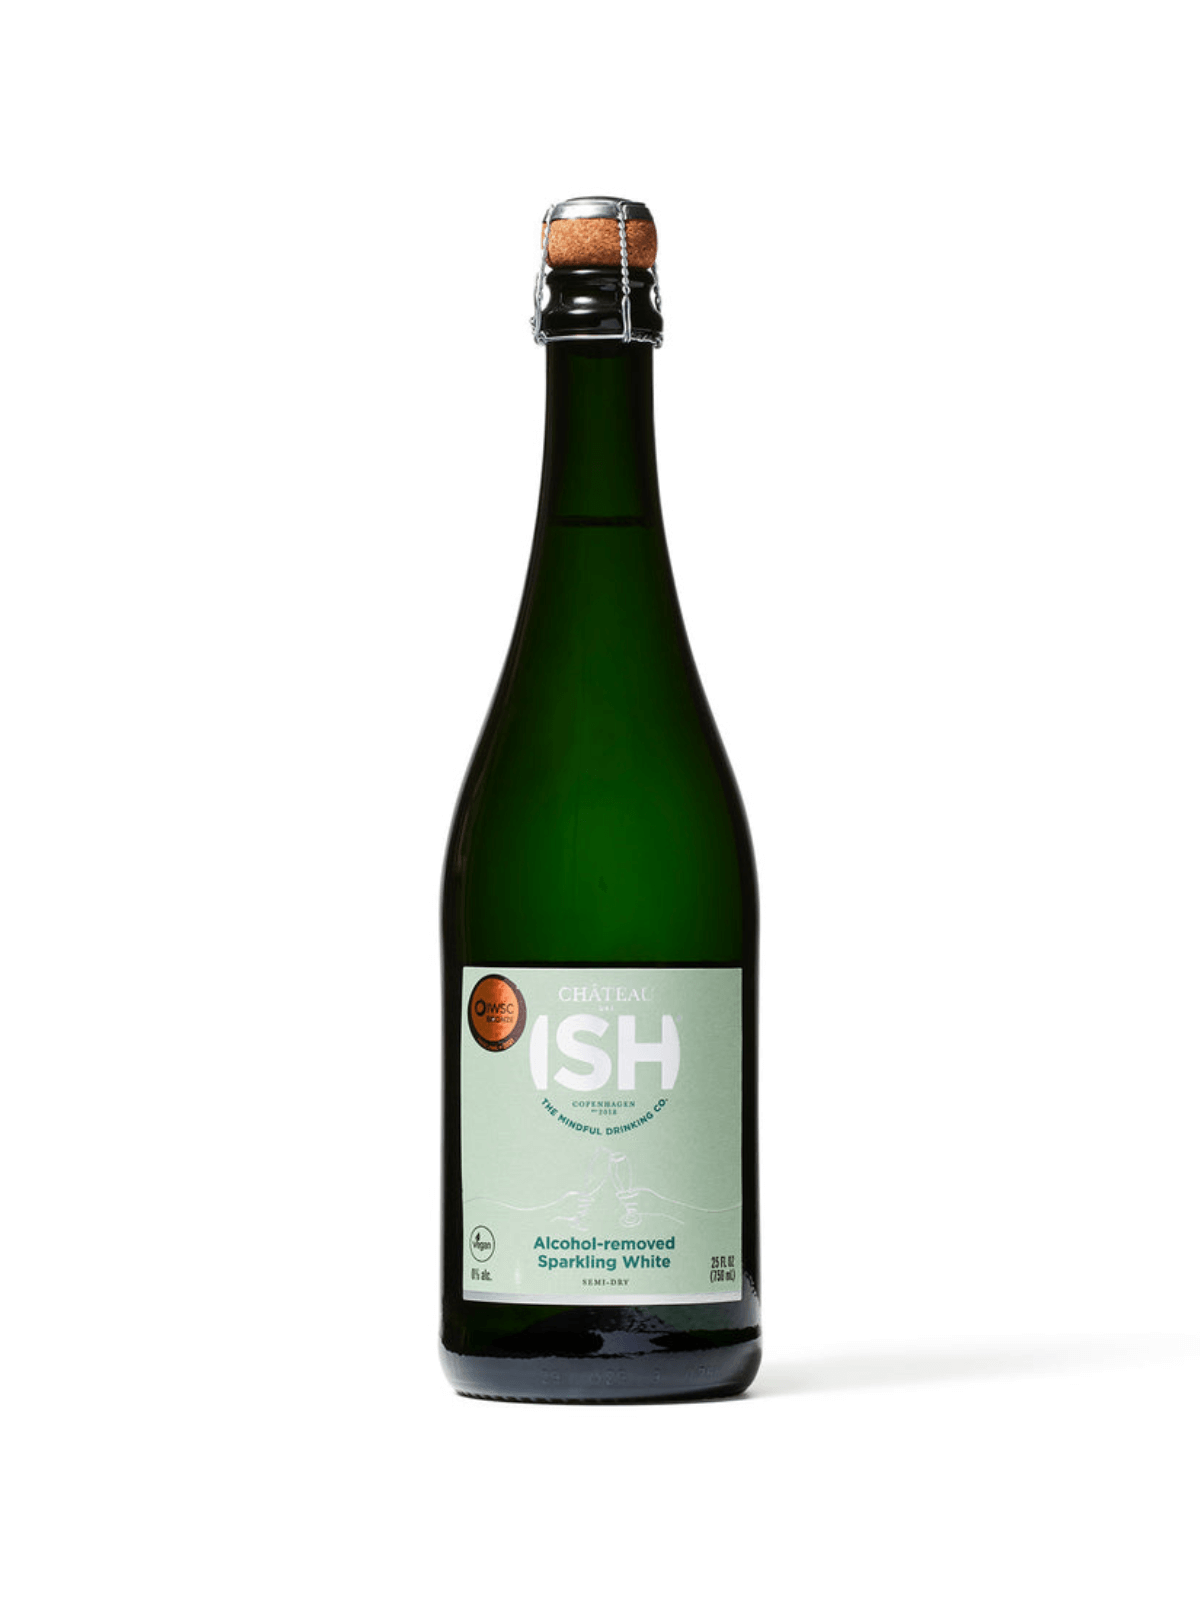 a product shot of a wine called ISH in a green bottle with a light green label and aqua writing.